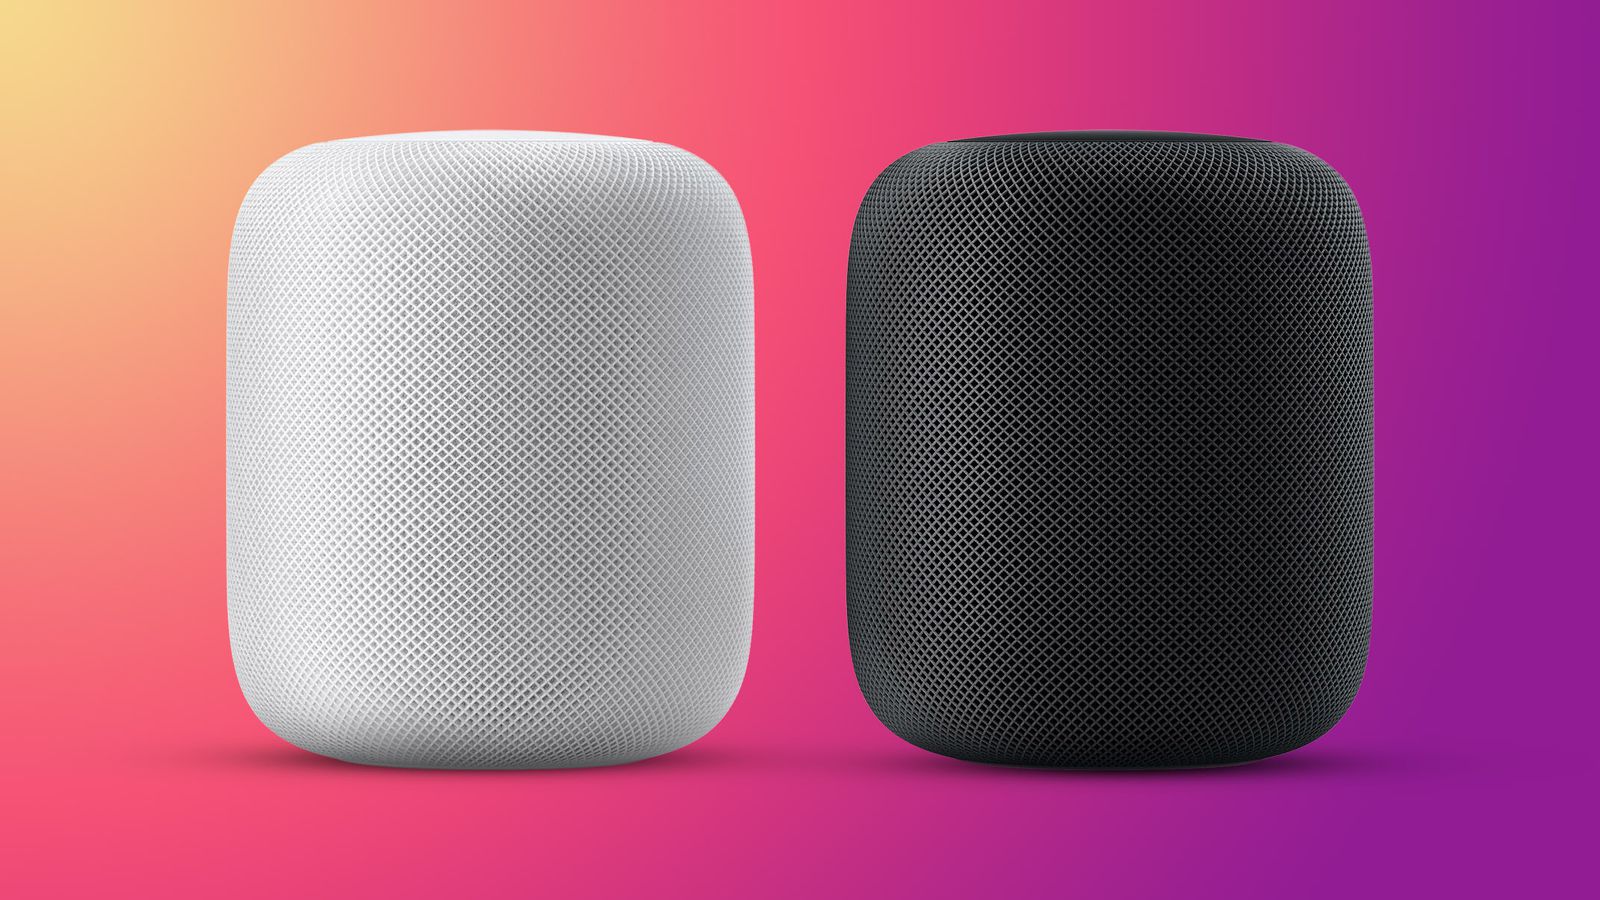 Apple Considered Updating Original HomePod With Improved Processor 